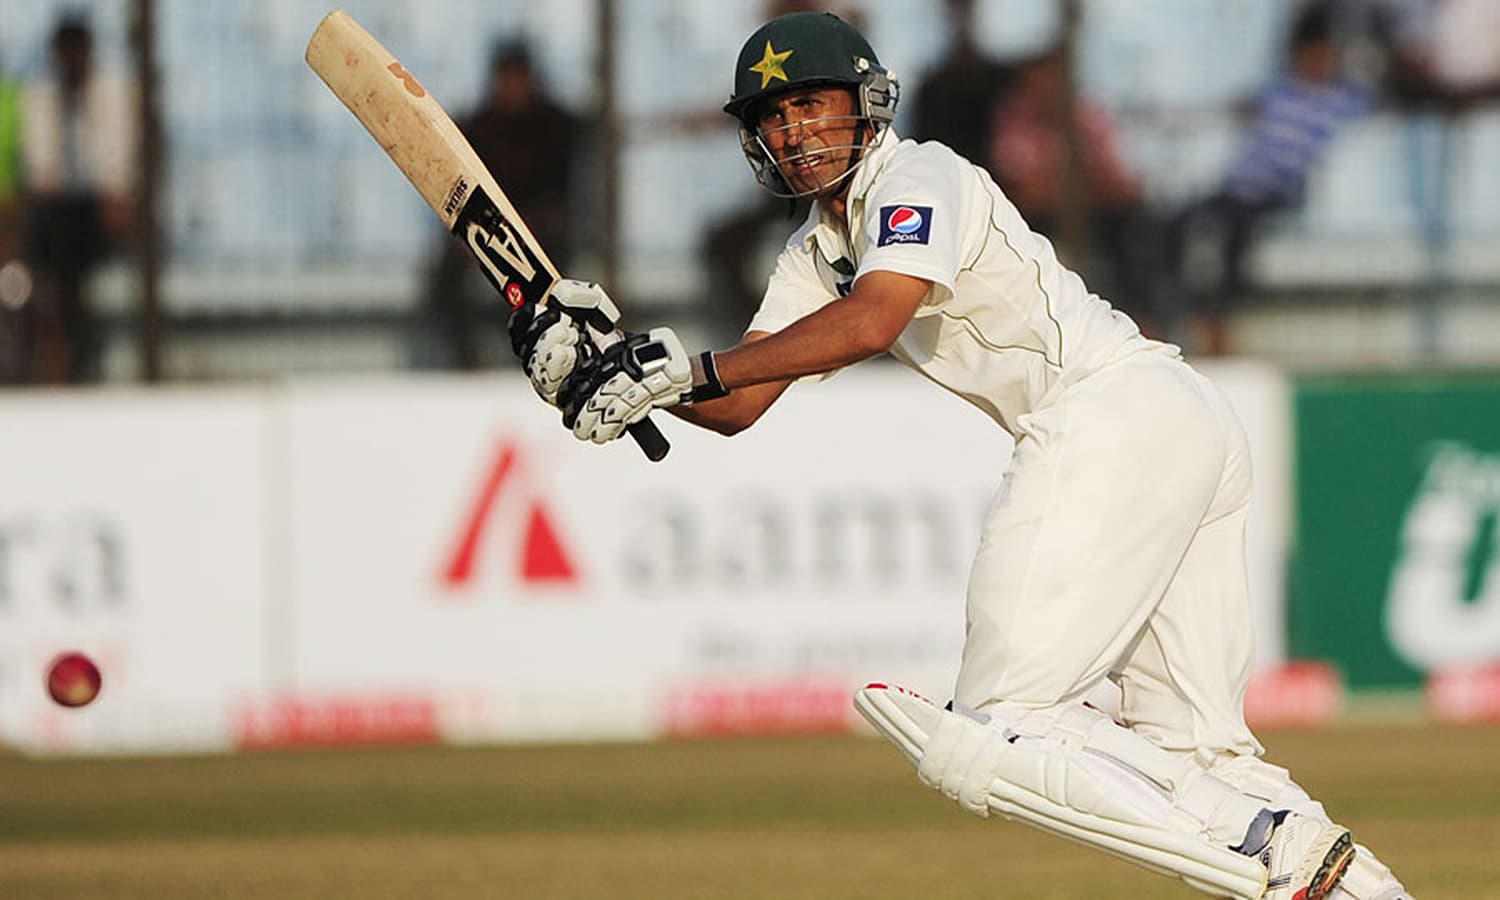 Pakistanis joyed over Younis Khan's appointment as a batting coach for England's tour